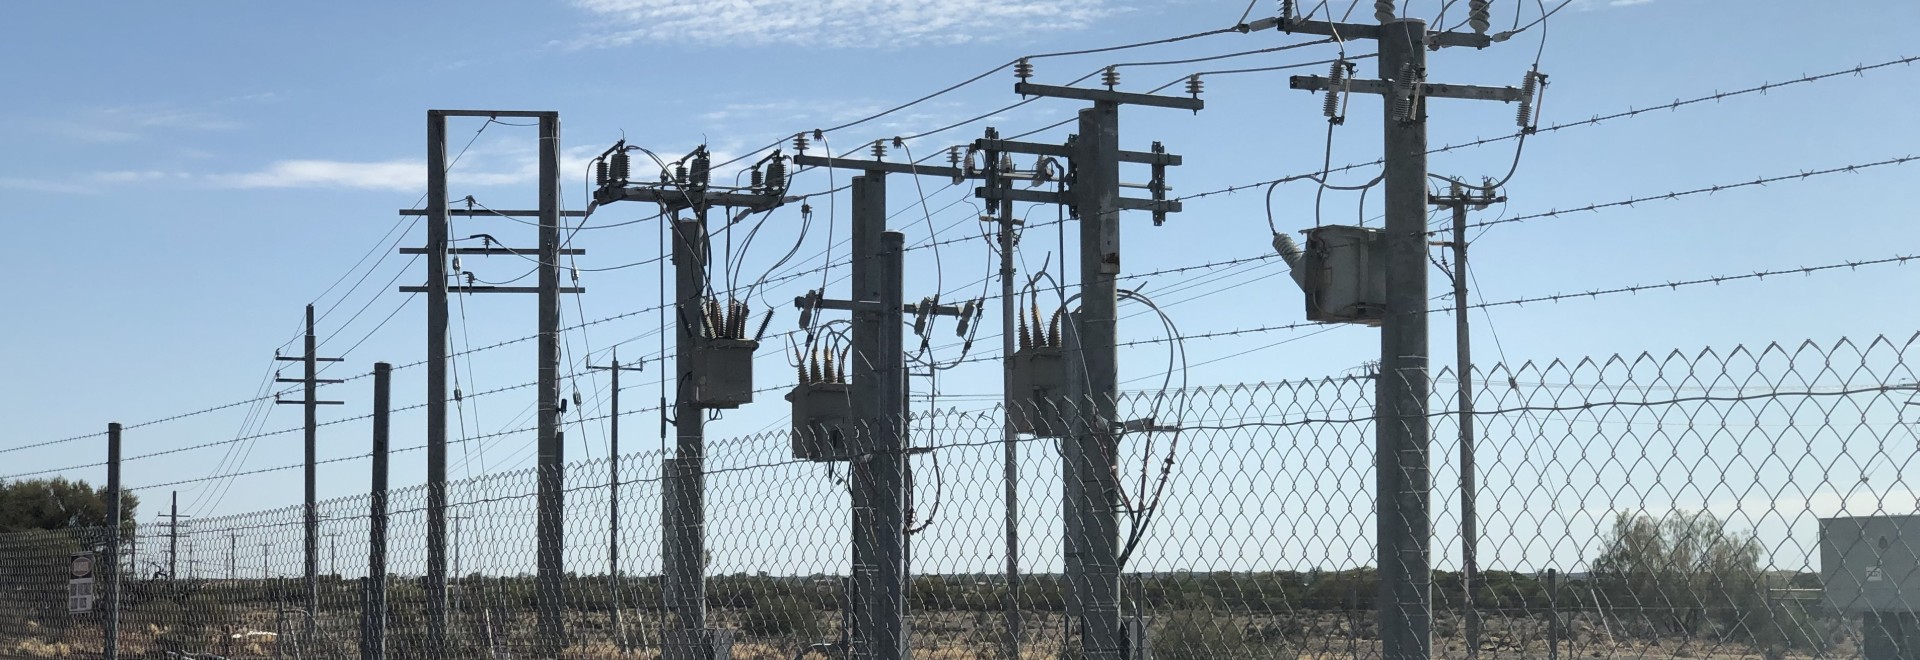 Power lines behind a chainlink fence